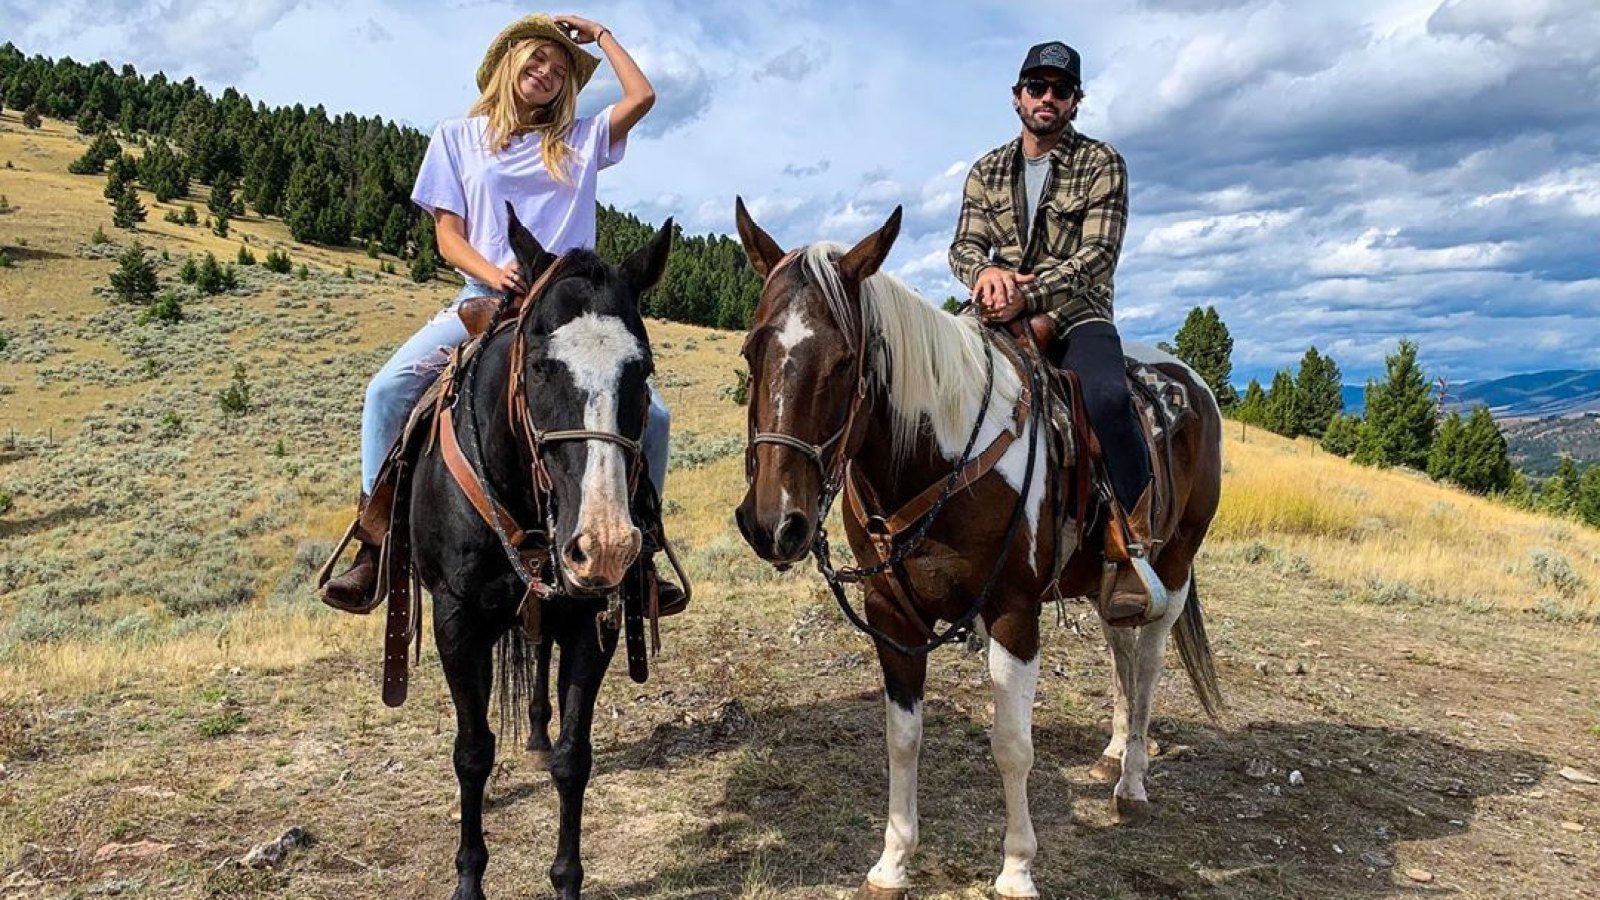 Brody Jenner Makes His Relationship with Josie Canseco Instagram Official with Horseback Riding Photo